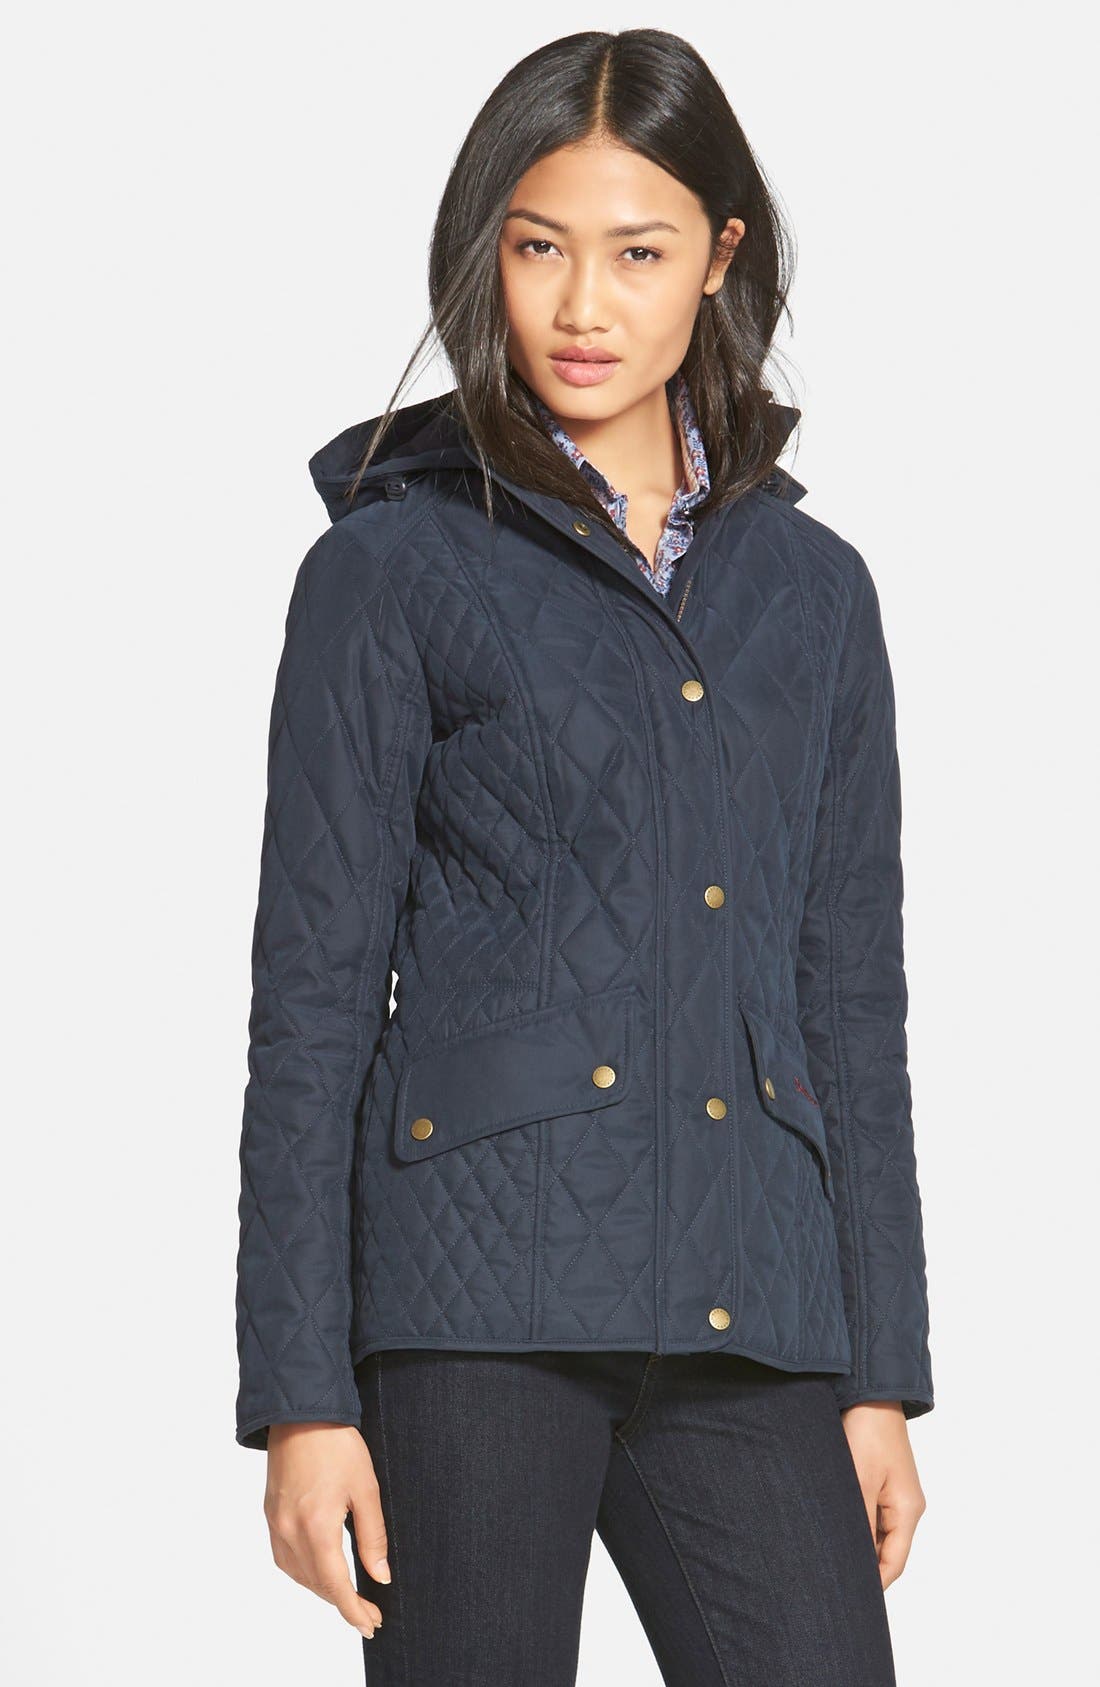 are barbour quilted jackets waterproof